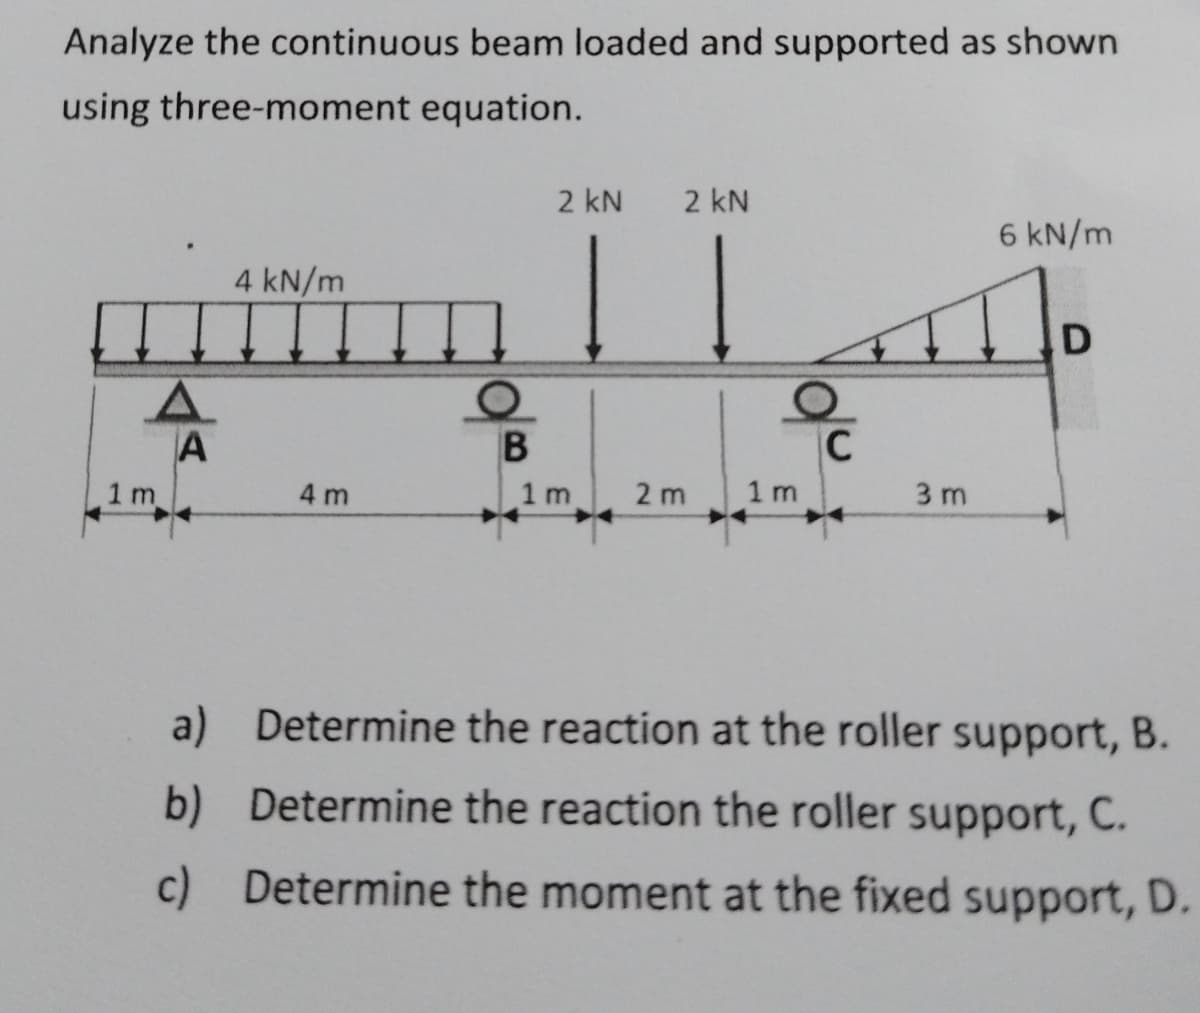 Analyze the continuous beam loaded and supported as shown
using three-moment equation.
1 m
A
A
2 kN
2 kN
6 kN/m
4 kN/m
D
0
B
C
4 m
1 m
2 m
1 m
3 m
a) Determine the reaction at the roller support, B.
b) Determine the reaction the roller support, C.
c) Determine the moment at the fixed support, D.